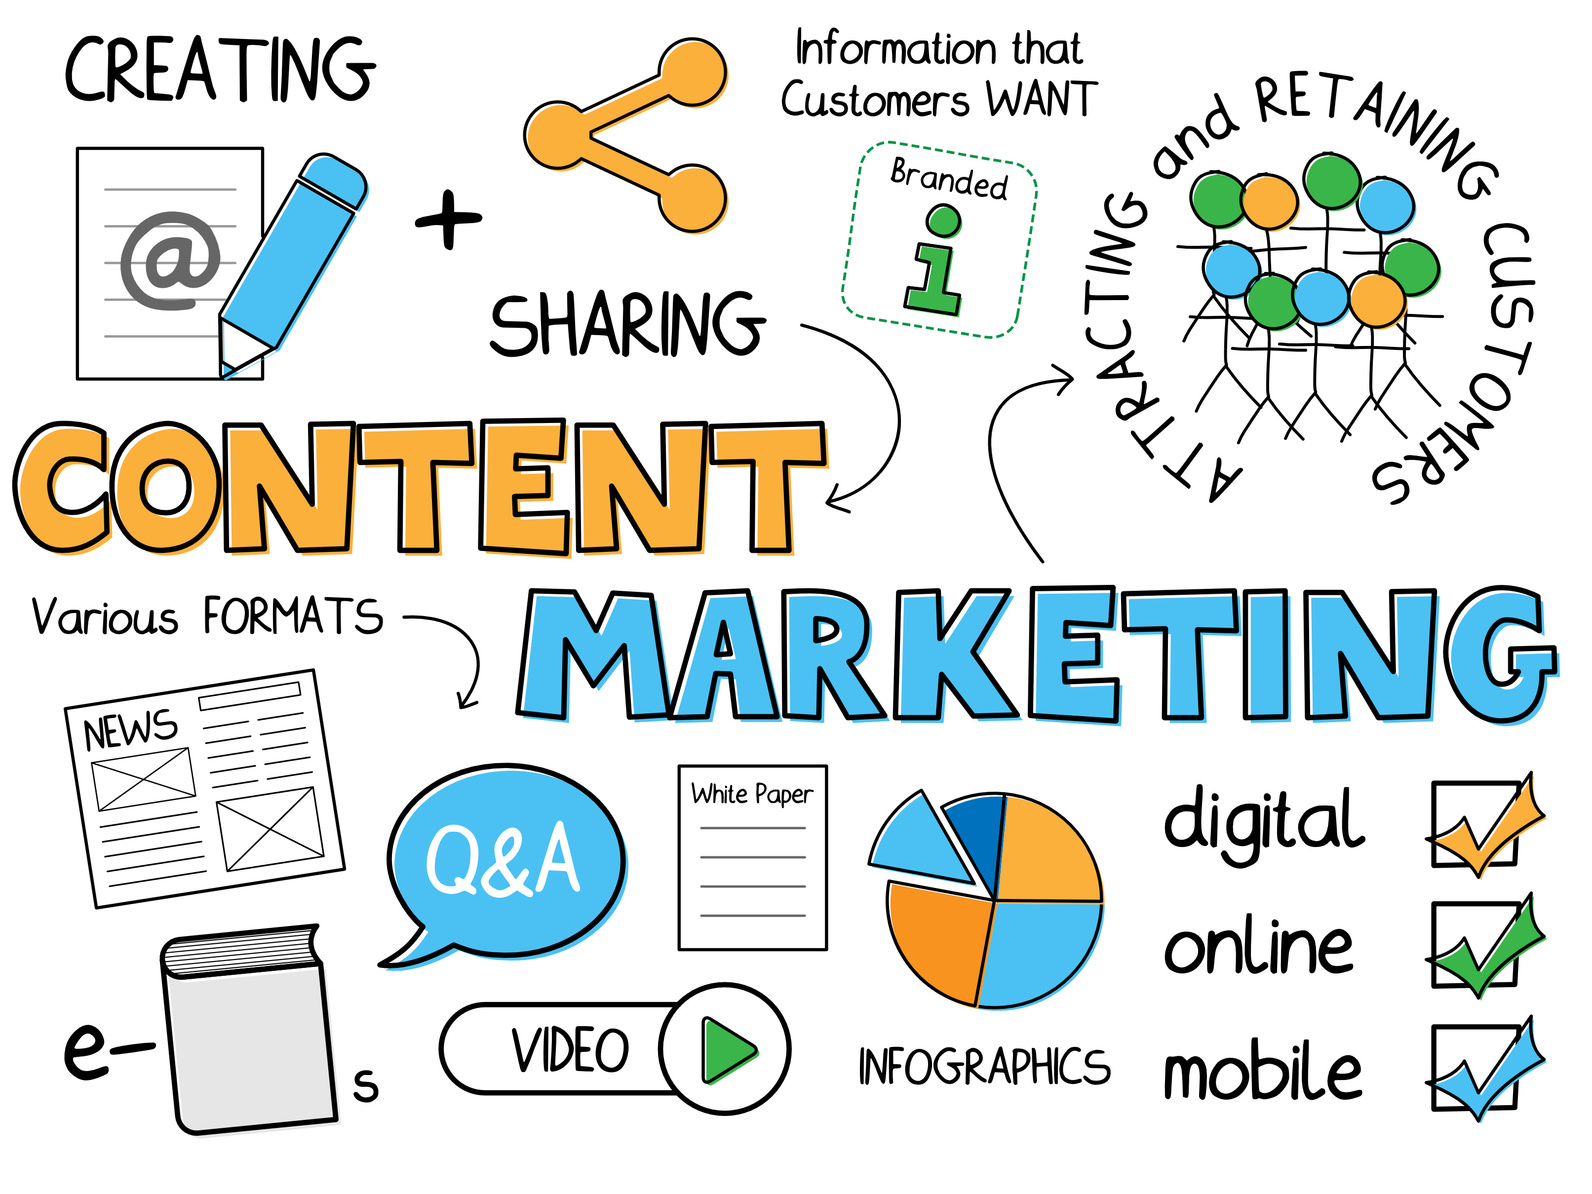 whats another word for content marketing